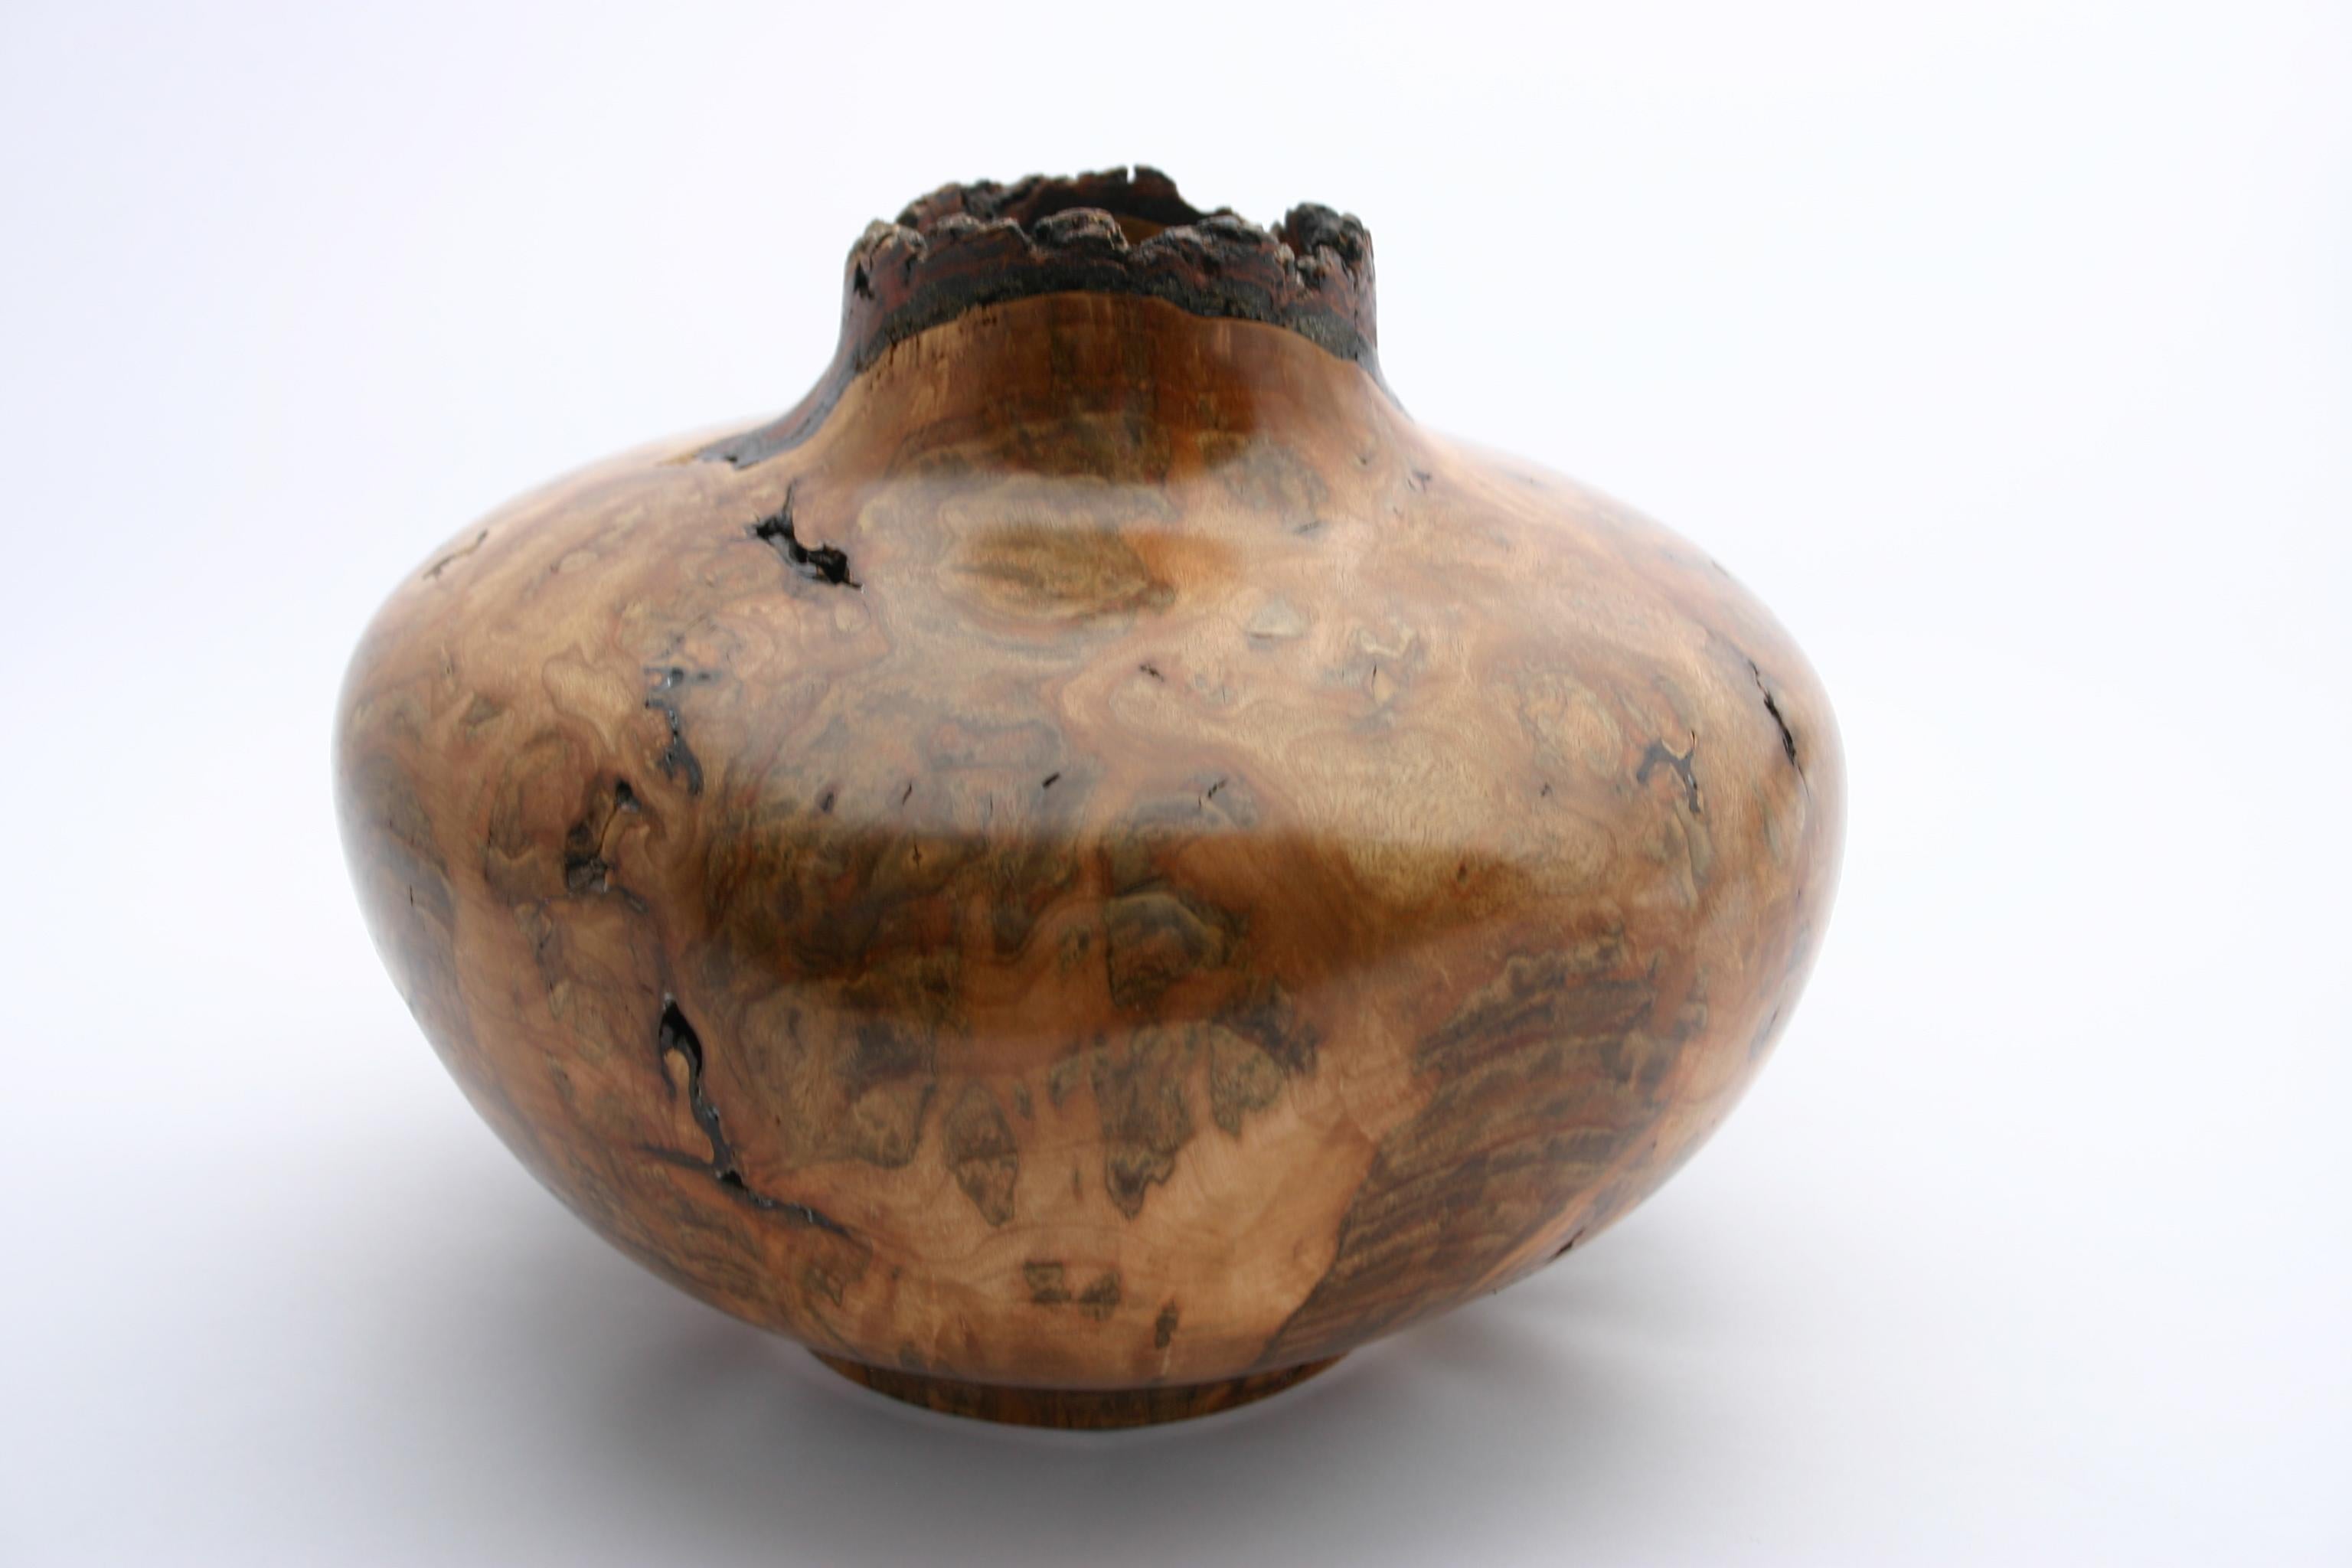 Hand-turned maple burl wood finished to perfection with a natural edge. These pieces are generally carved from freshly cut trees in such a way that the tree’s bark is still attached to the rim. Artist James Krom.